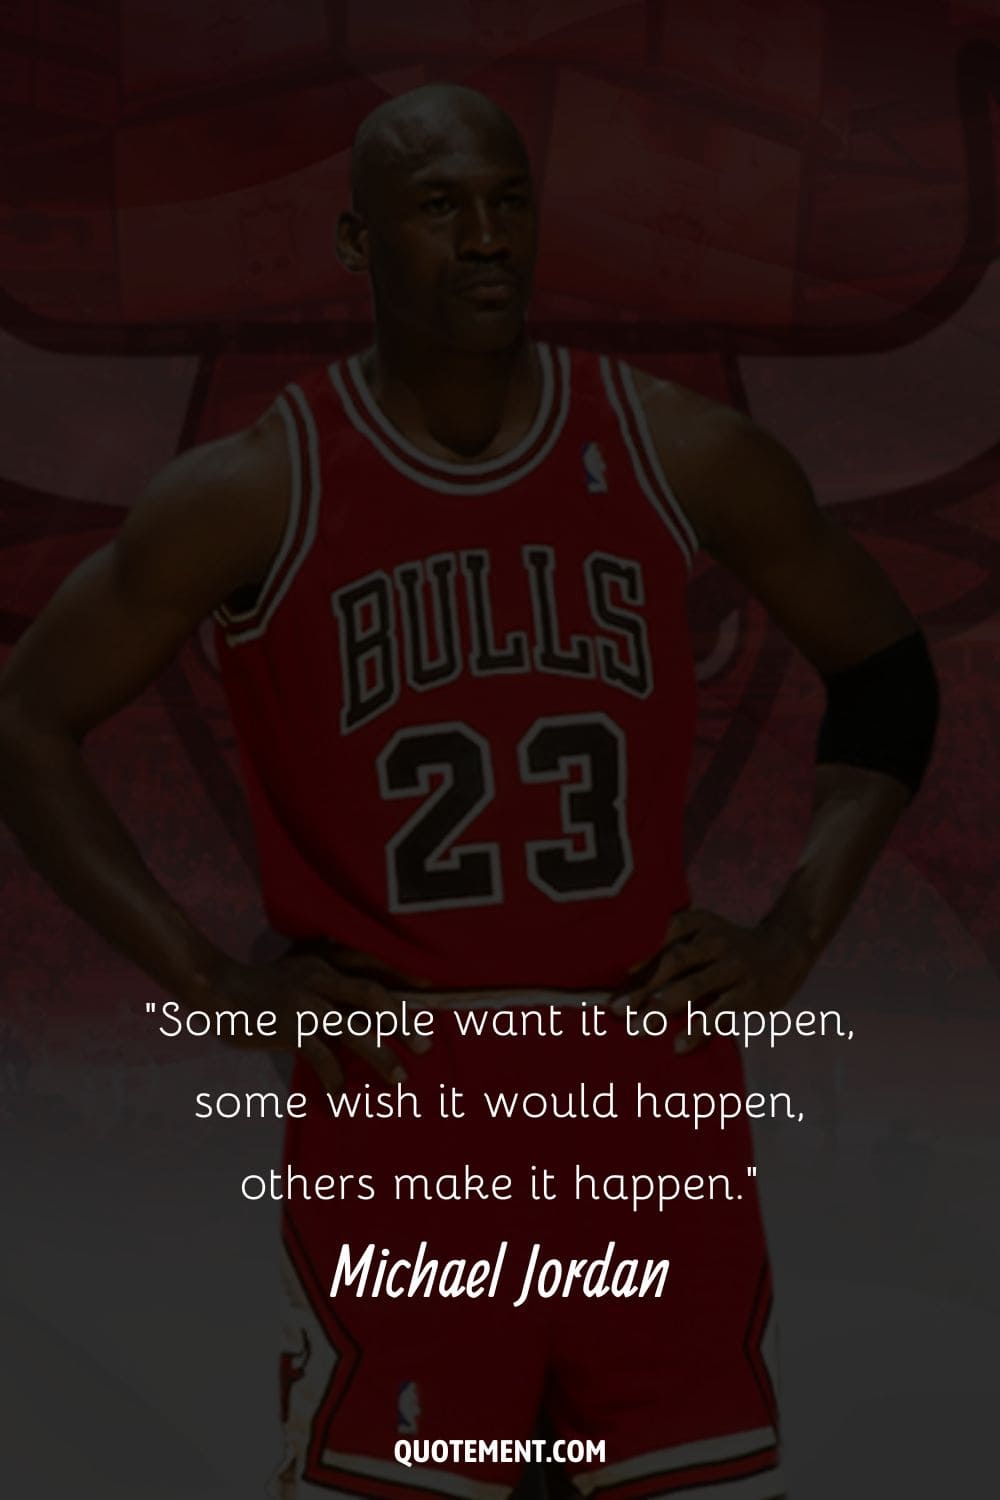 Michael Jordan with hands on hips on the court representing michael jordan famous quote